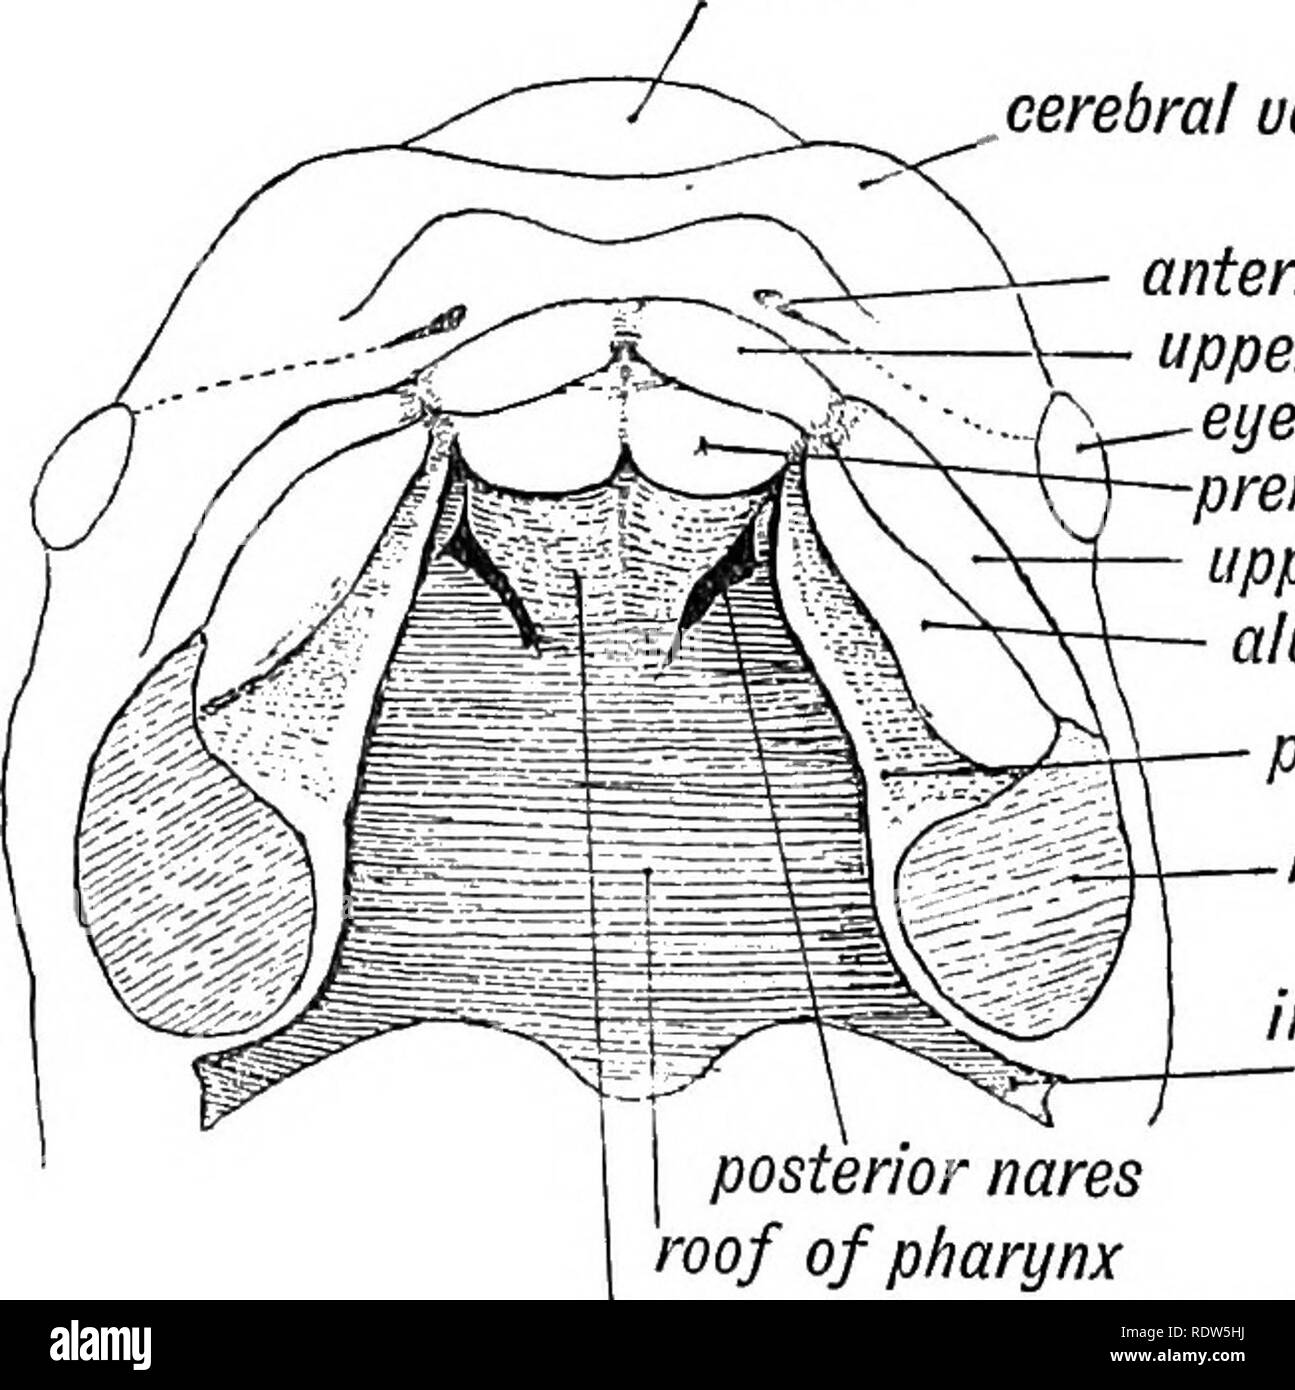 . Human embryology and morphology. Embryology, Human; Morphology. 8 HUMAN EMBRYOLOGY AND MOBPHOLOGY. accompany the nerves from the descending palatine. The nasal nerve and anterior ethmoidal artery supply the process in Iron It will thus be seen that the chief nerves and arteries ol botn processes are derived from structures in the spheno-maxillary fossa. MAXILLARY PROCESSES. The Parts formed from each Maxillary Process.—The max- illary process springs from the base of the mandibular arch and sweeping forwards below the eye separates that structure from mid brain cerebral uesicle anterior nare Stock Photo